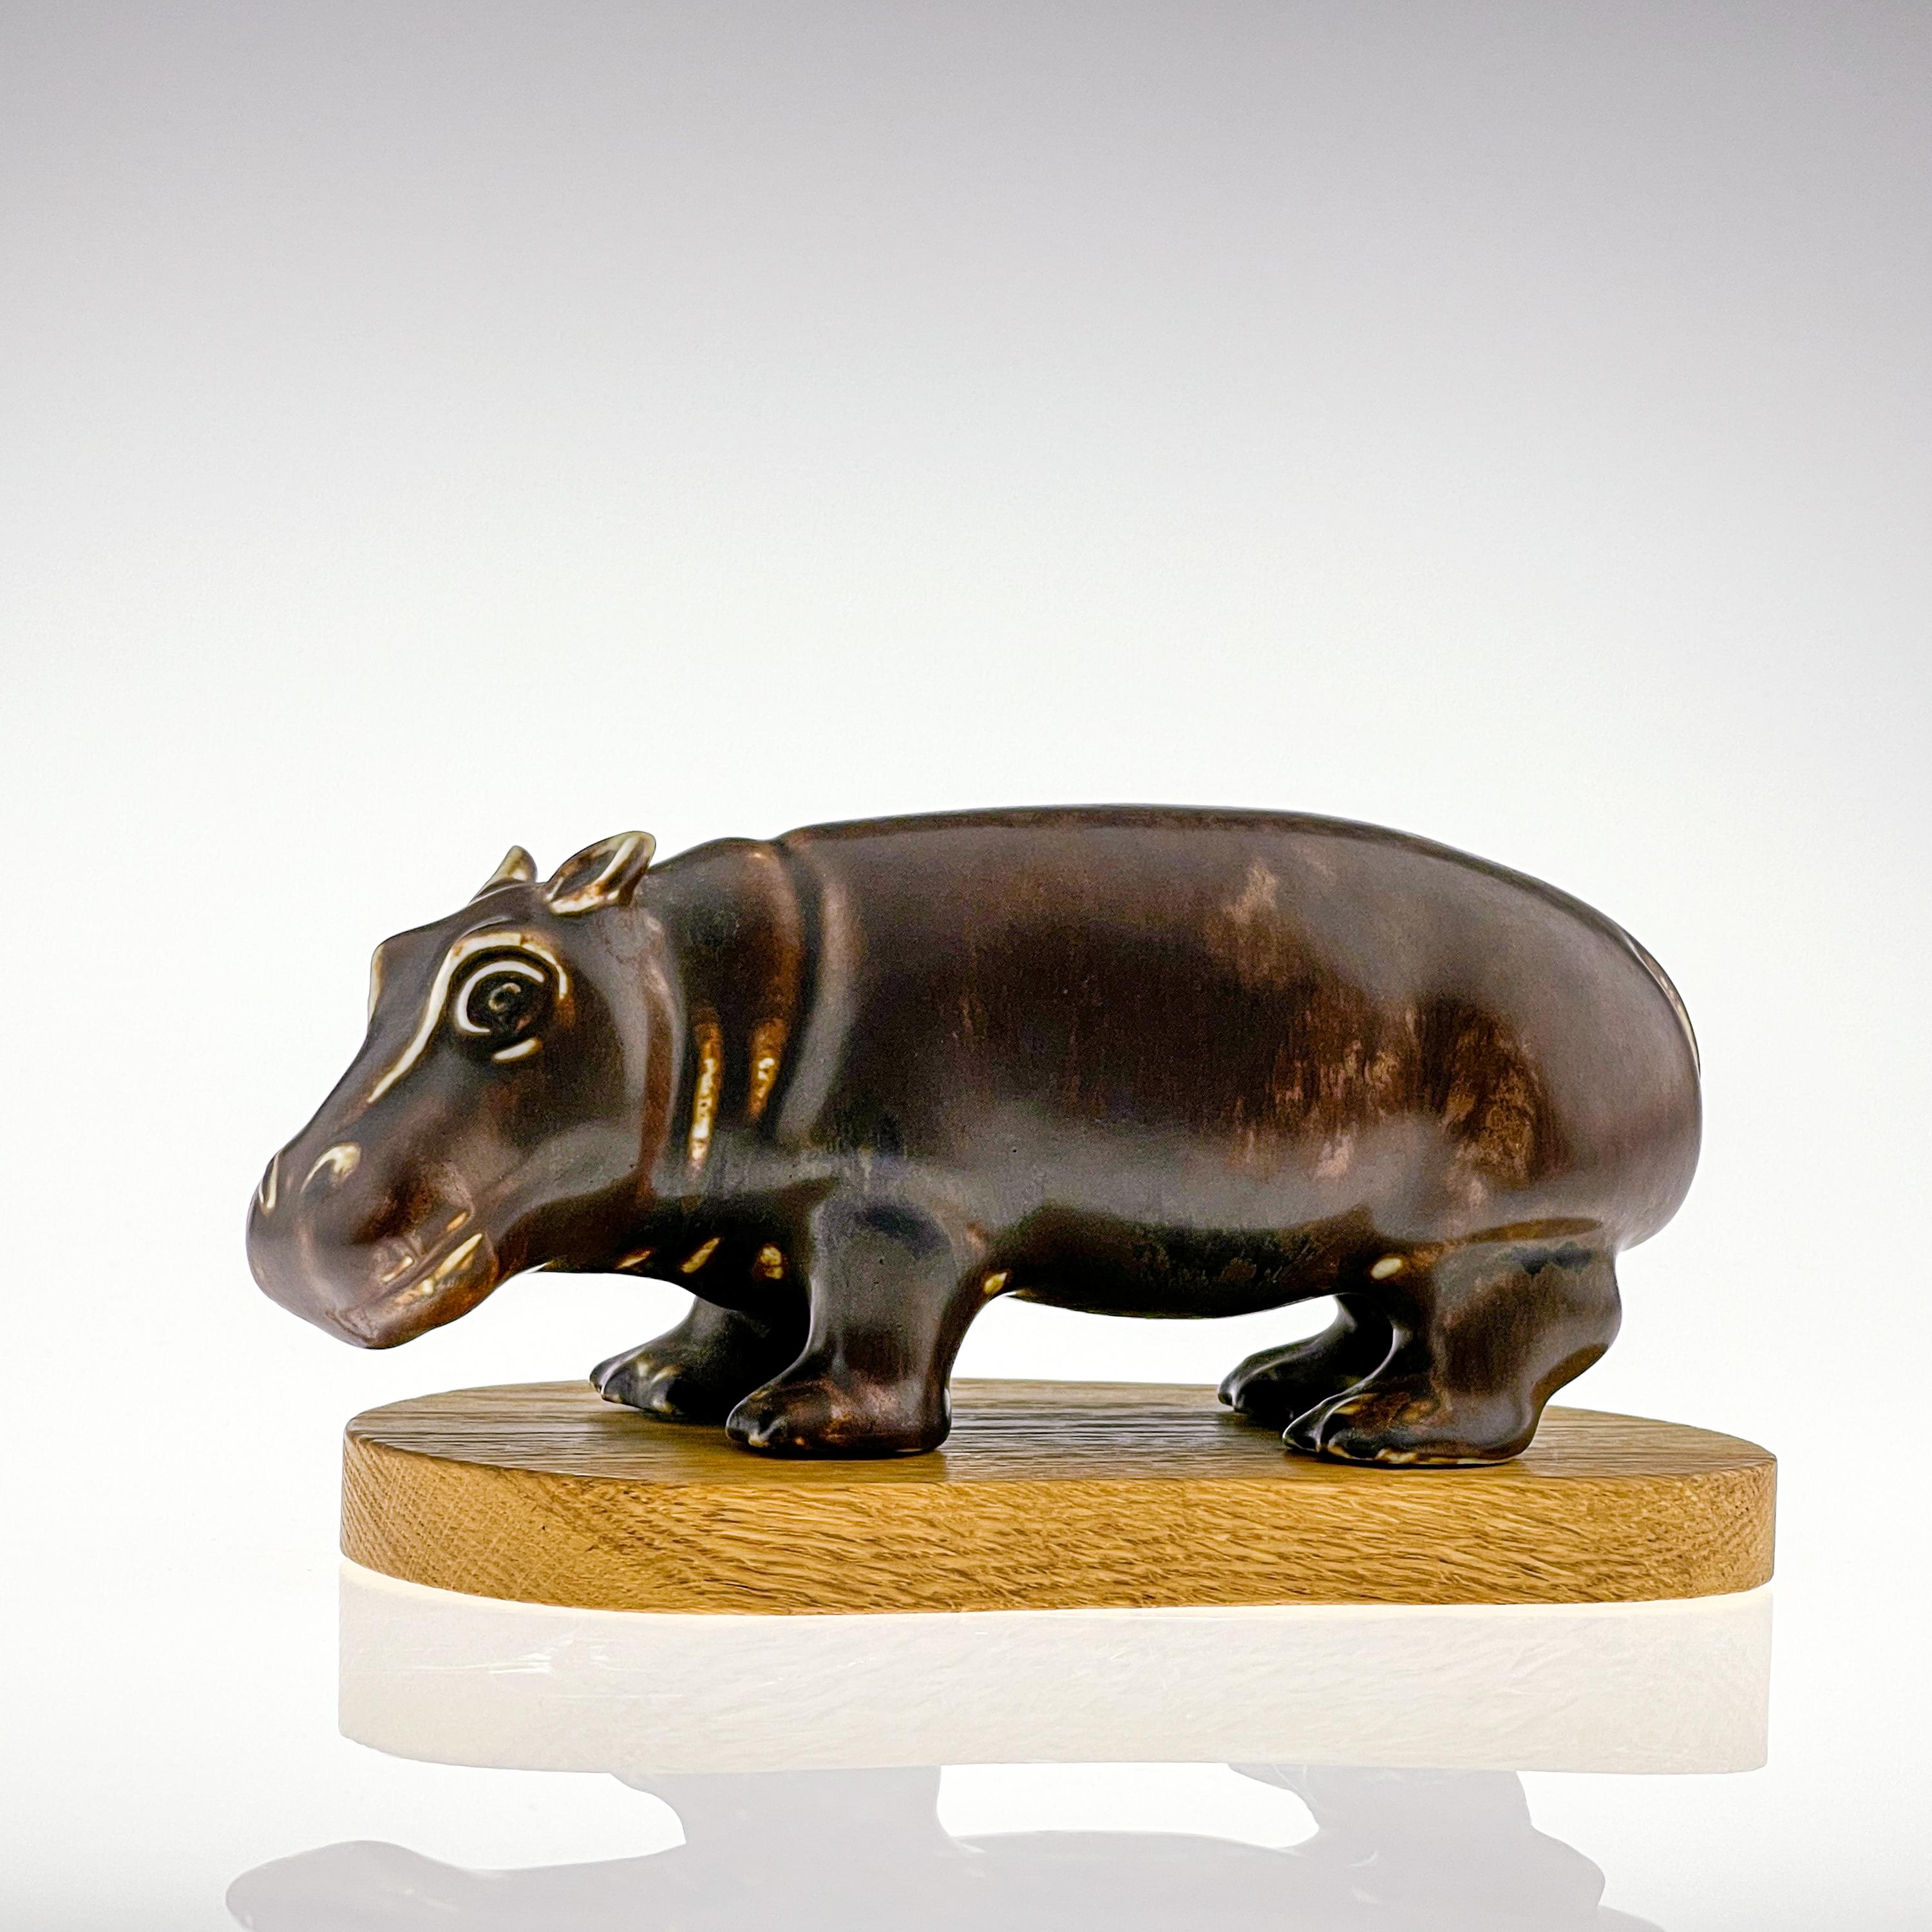 Gunnar Nylund, stoneware sculpture of a hippo, rörstrand, Sweden, circa 1955.

Description
A stoneware sculpture of an antilope, finished in several shades of brown glazes on the original wooden base. 

Gunnar Nyland was particular known for